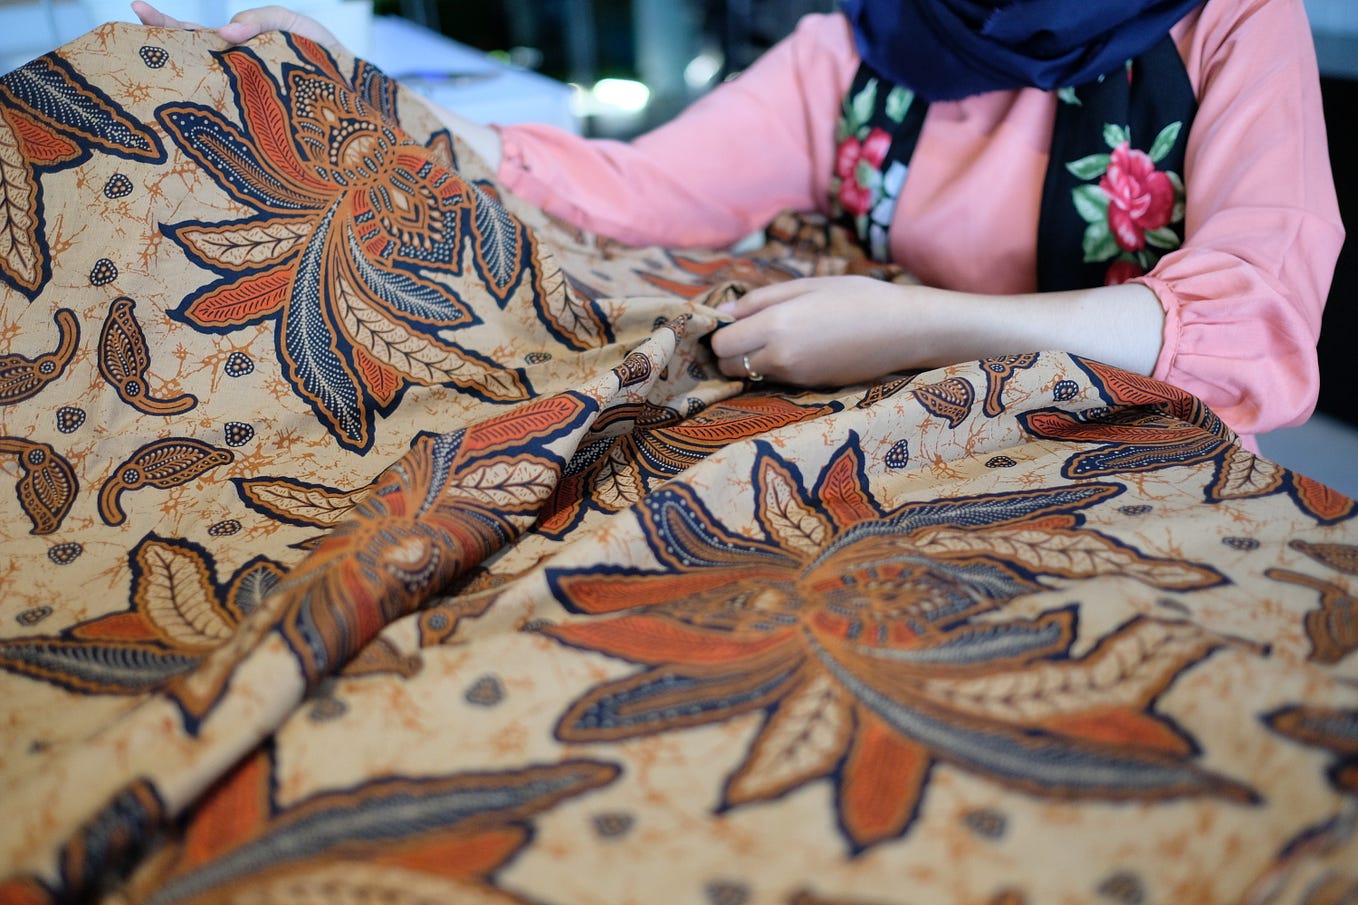 Batik After 10 Years of World Recognition